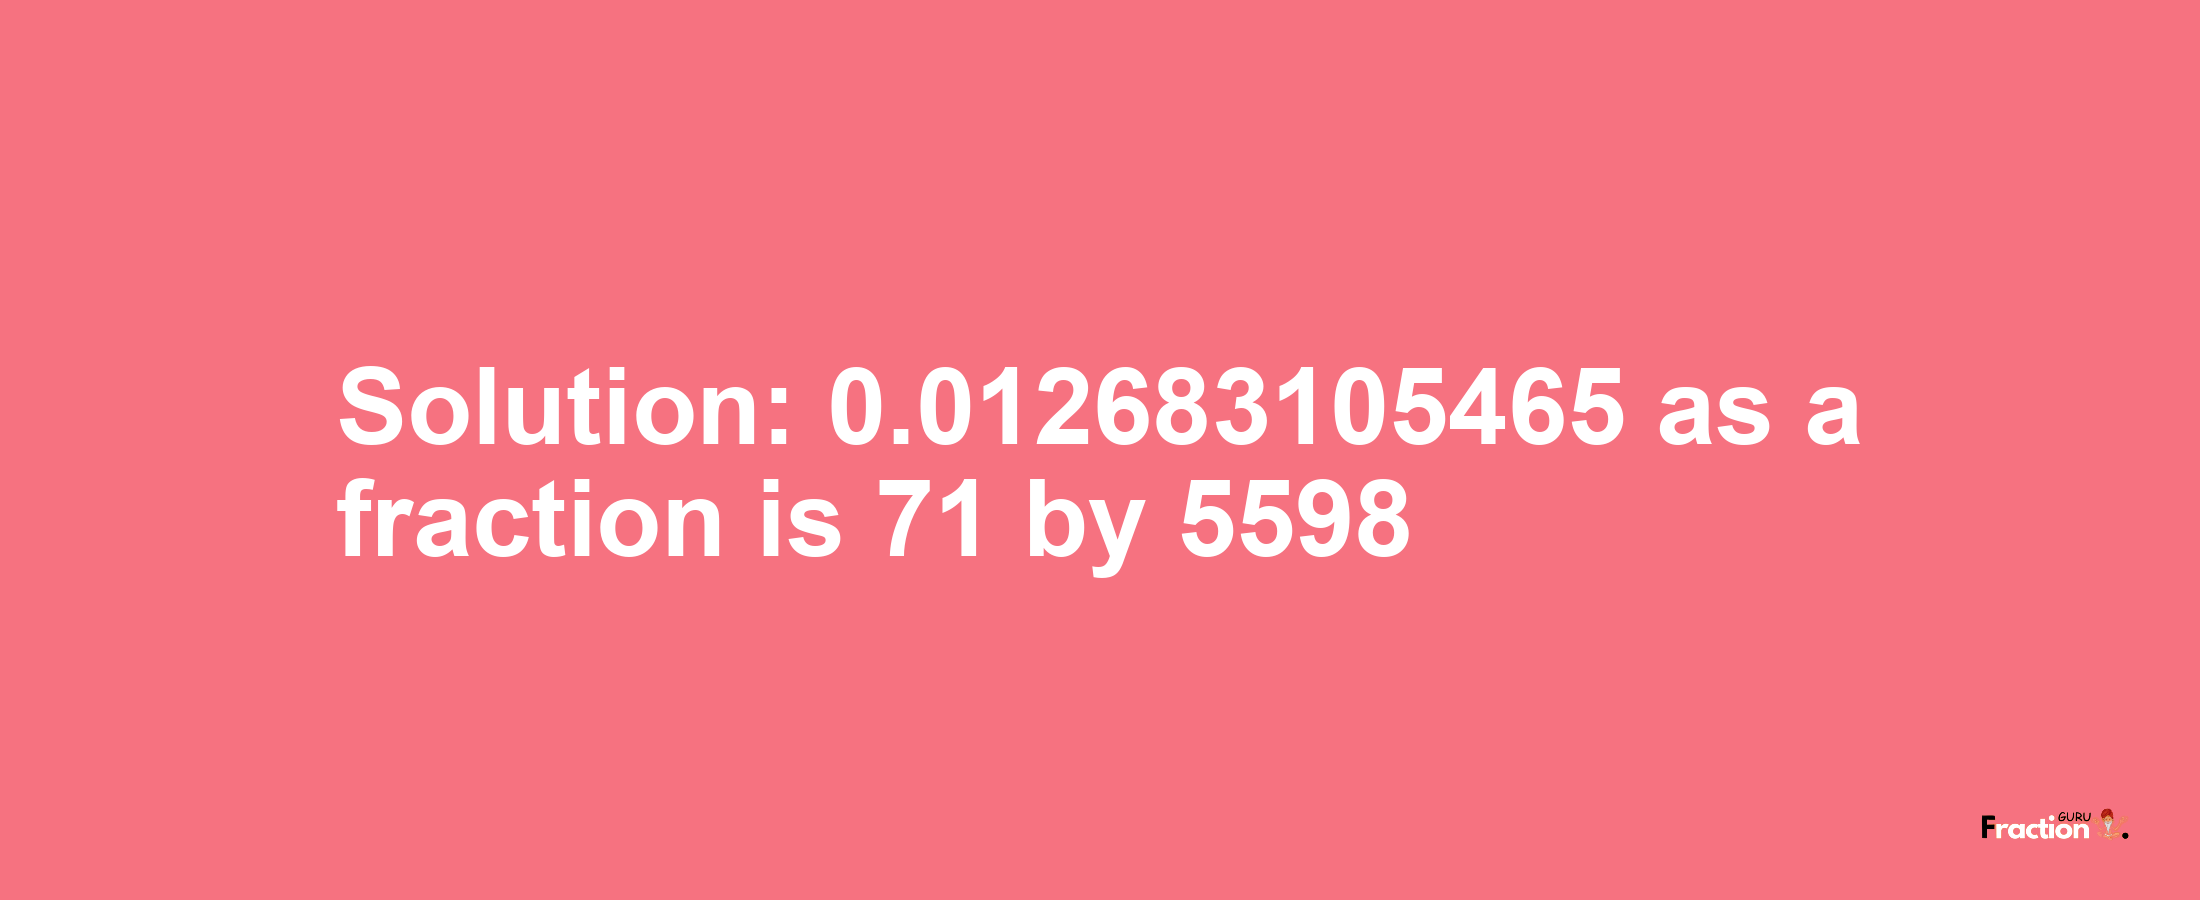 Solution:0.012683105465 as a fraction is 71/5598